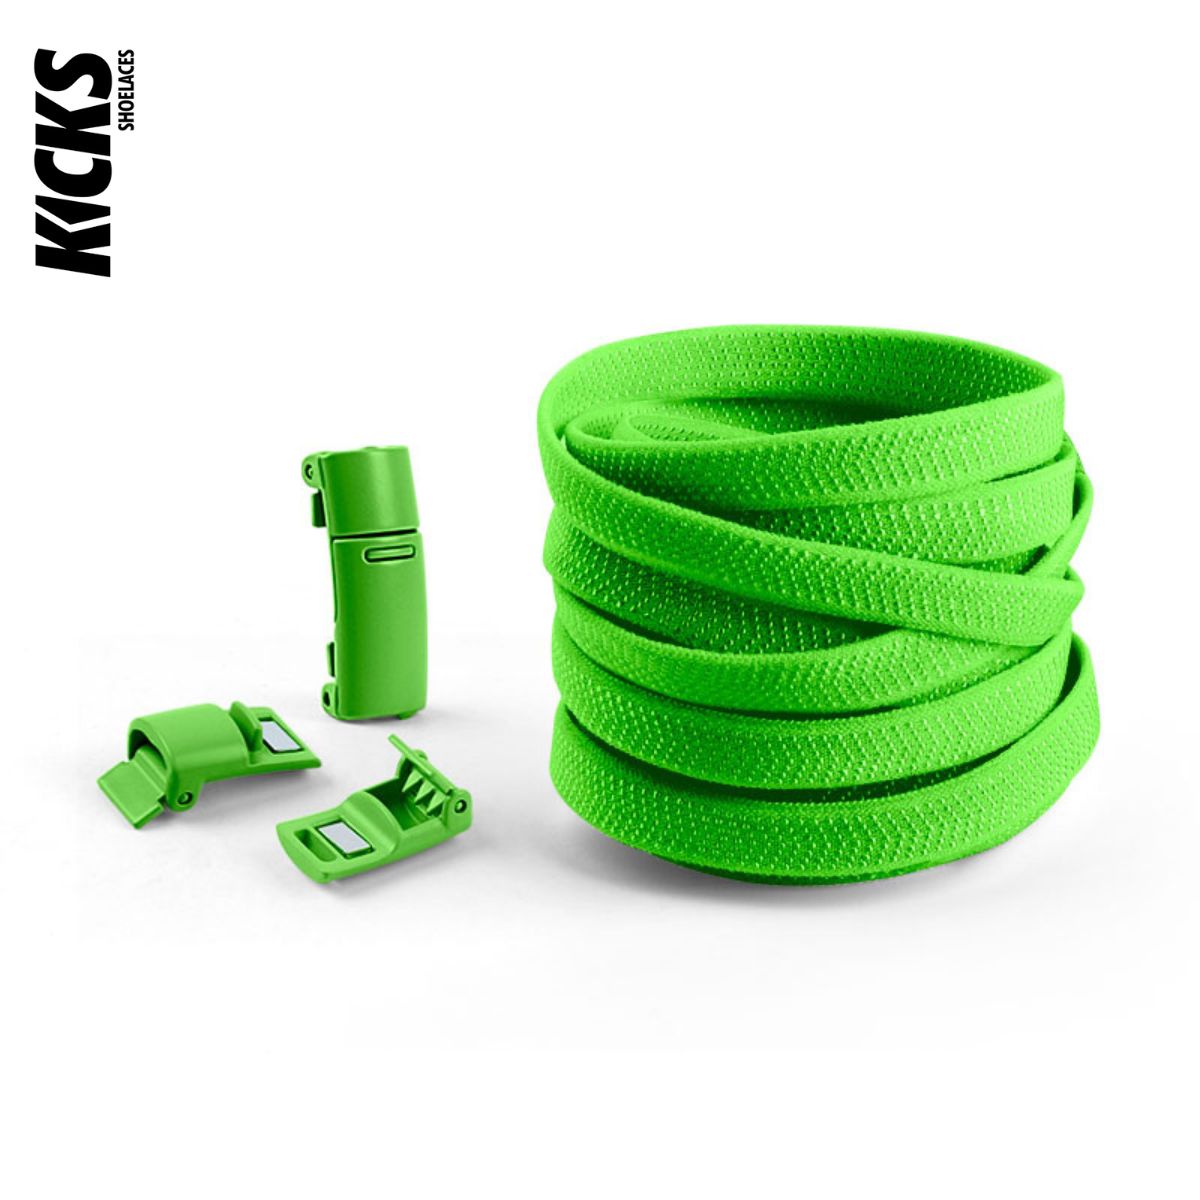 Green No-Tie Shoelaces with Magnetic Locks